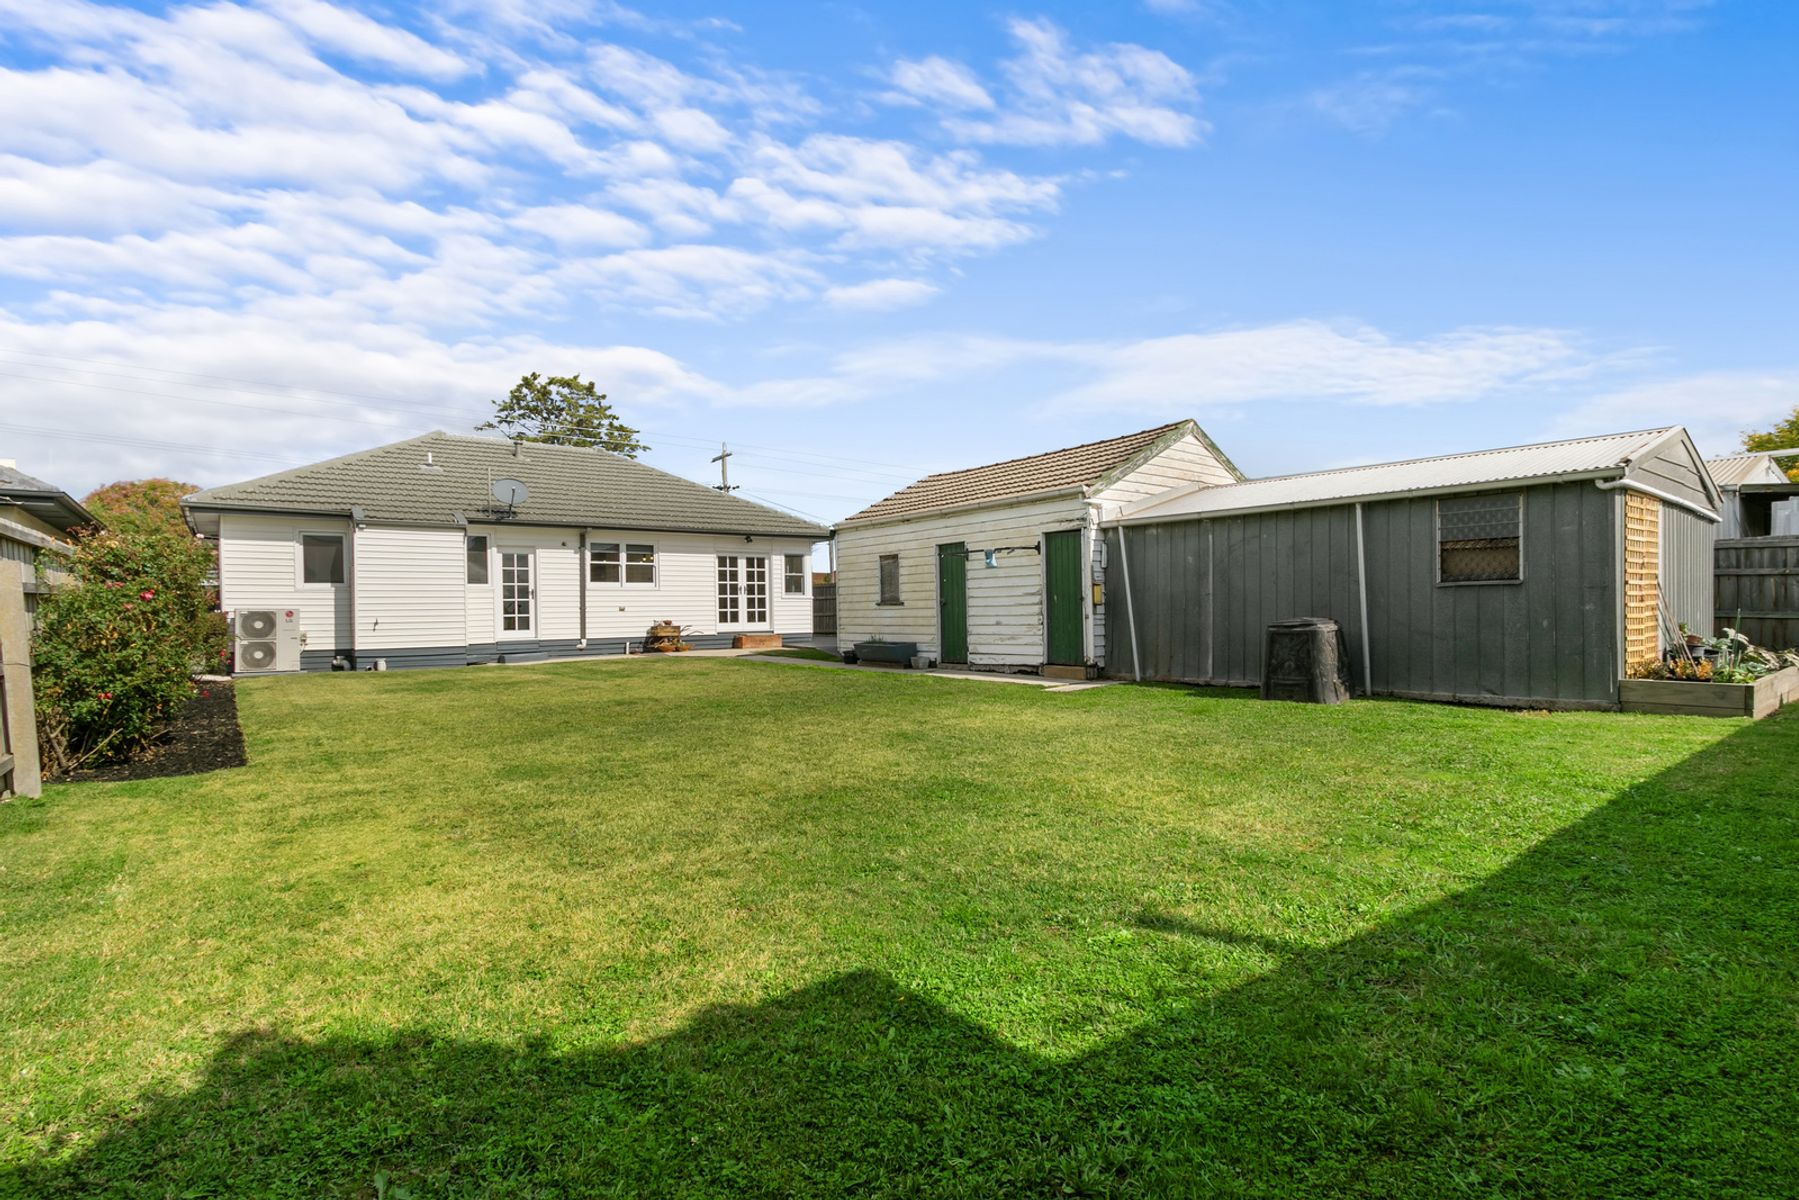 025 Open2view ID878653 44 Henry Street   Traralgon